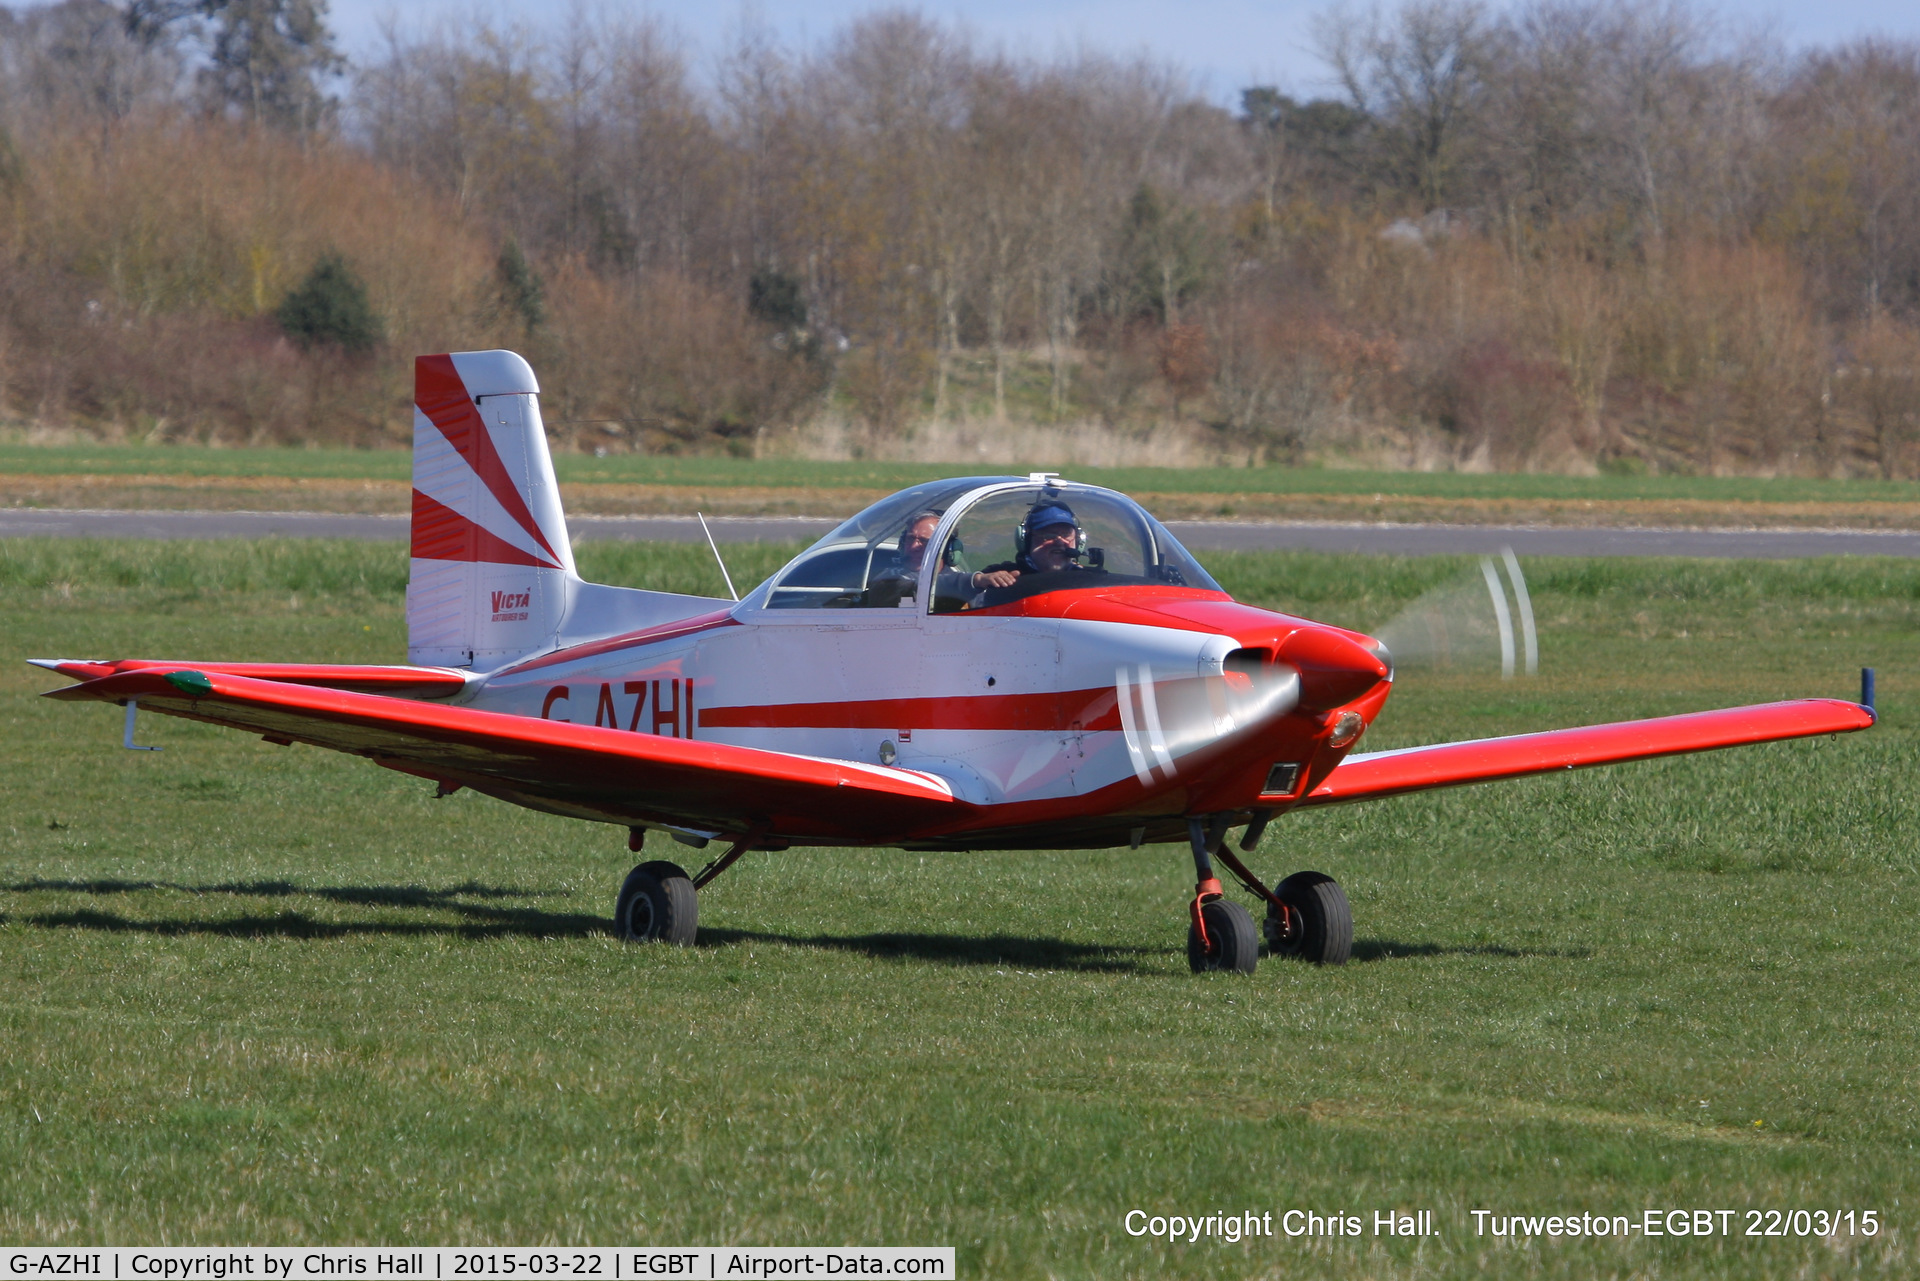 G-AZHI, 1971 AESL Glos-Airtourer Super 150/T5 C/N A540, at the Vintage Aircraft Club spring rally